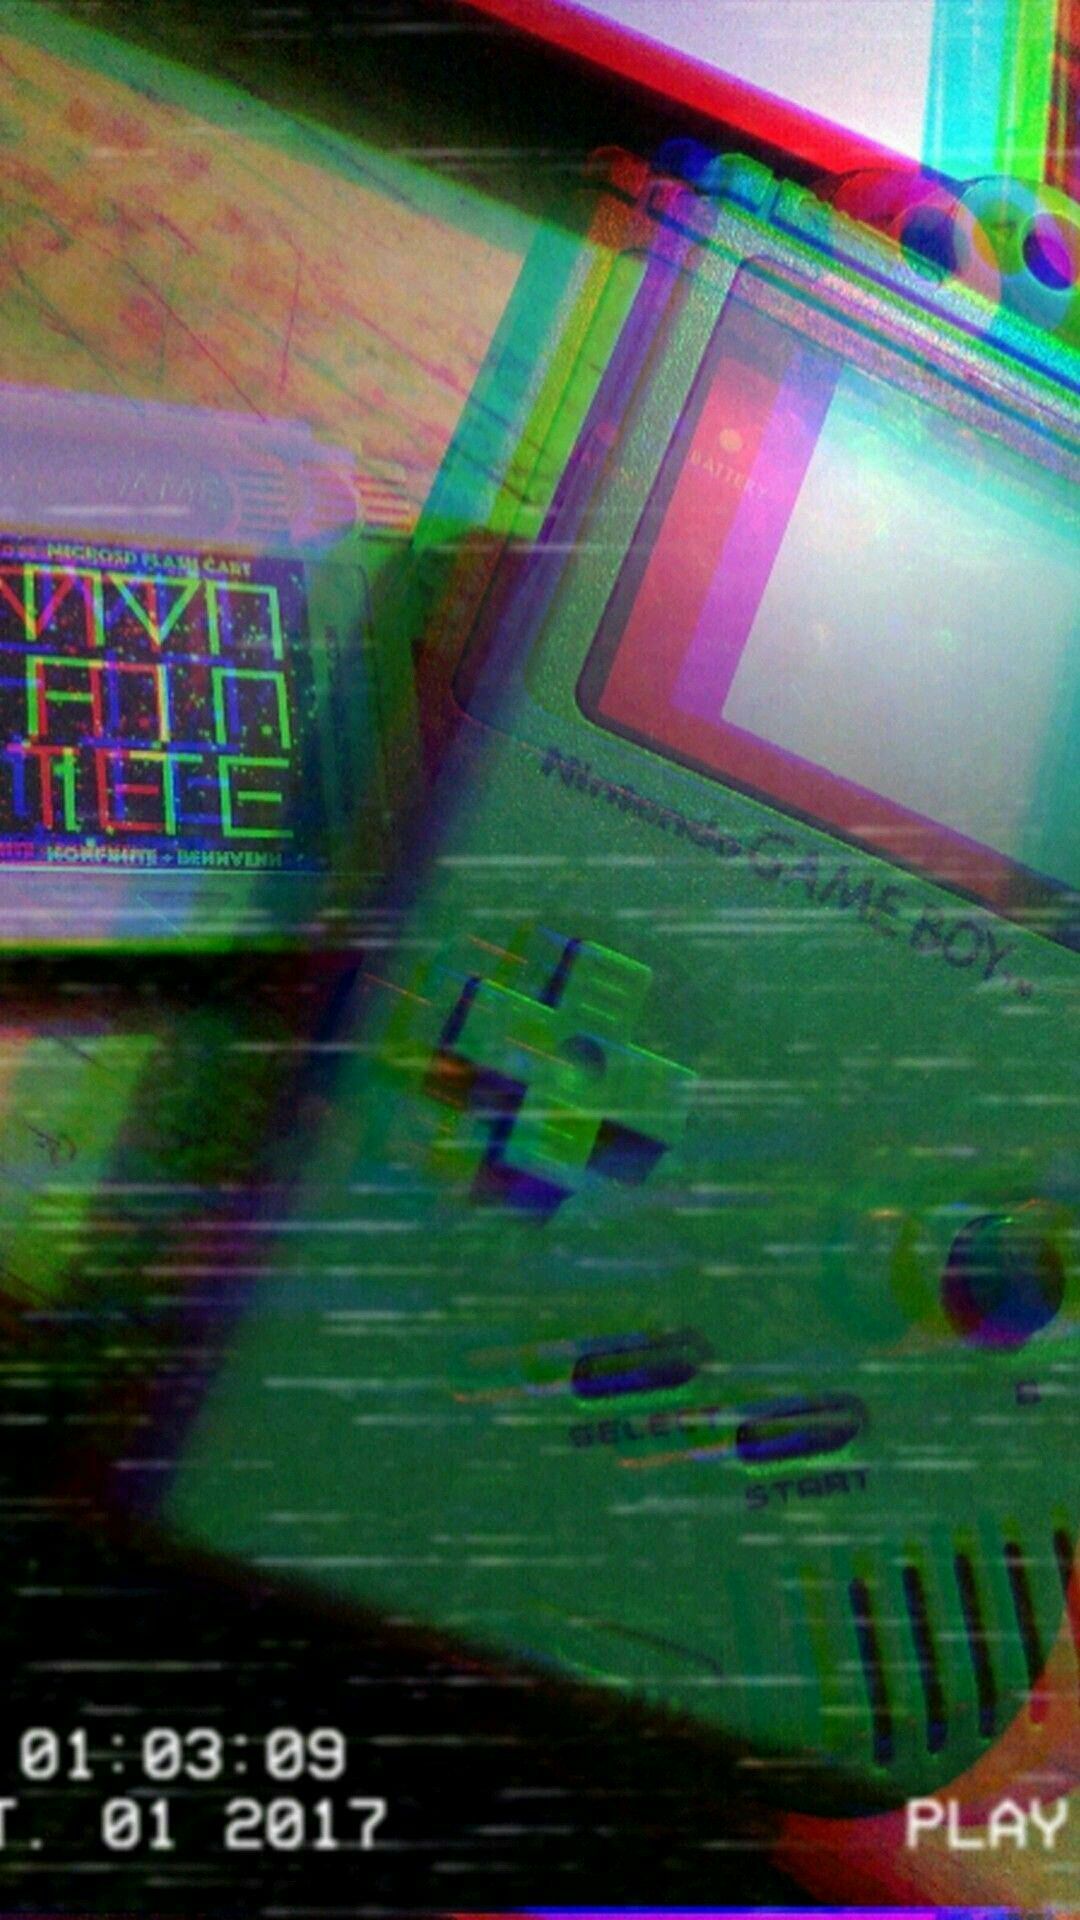 A picture of an old game system - VHS, glitch, Nintendo